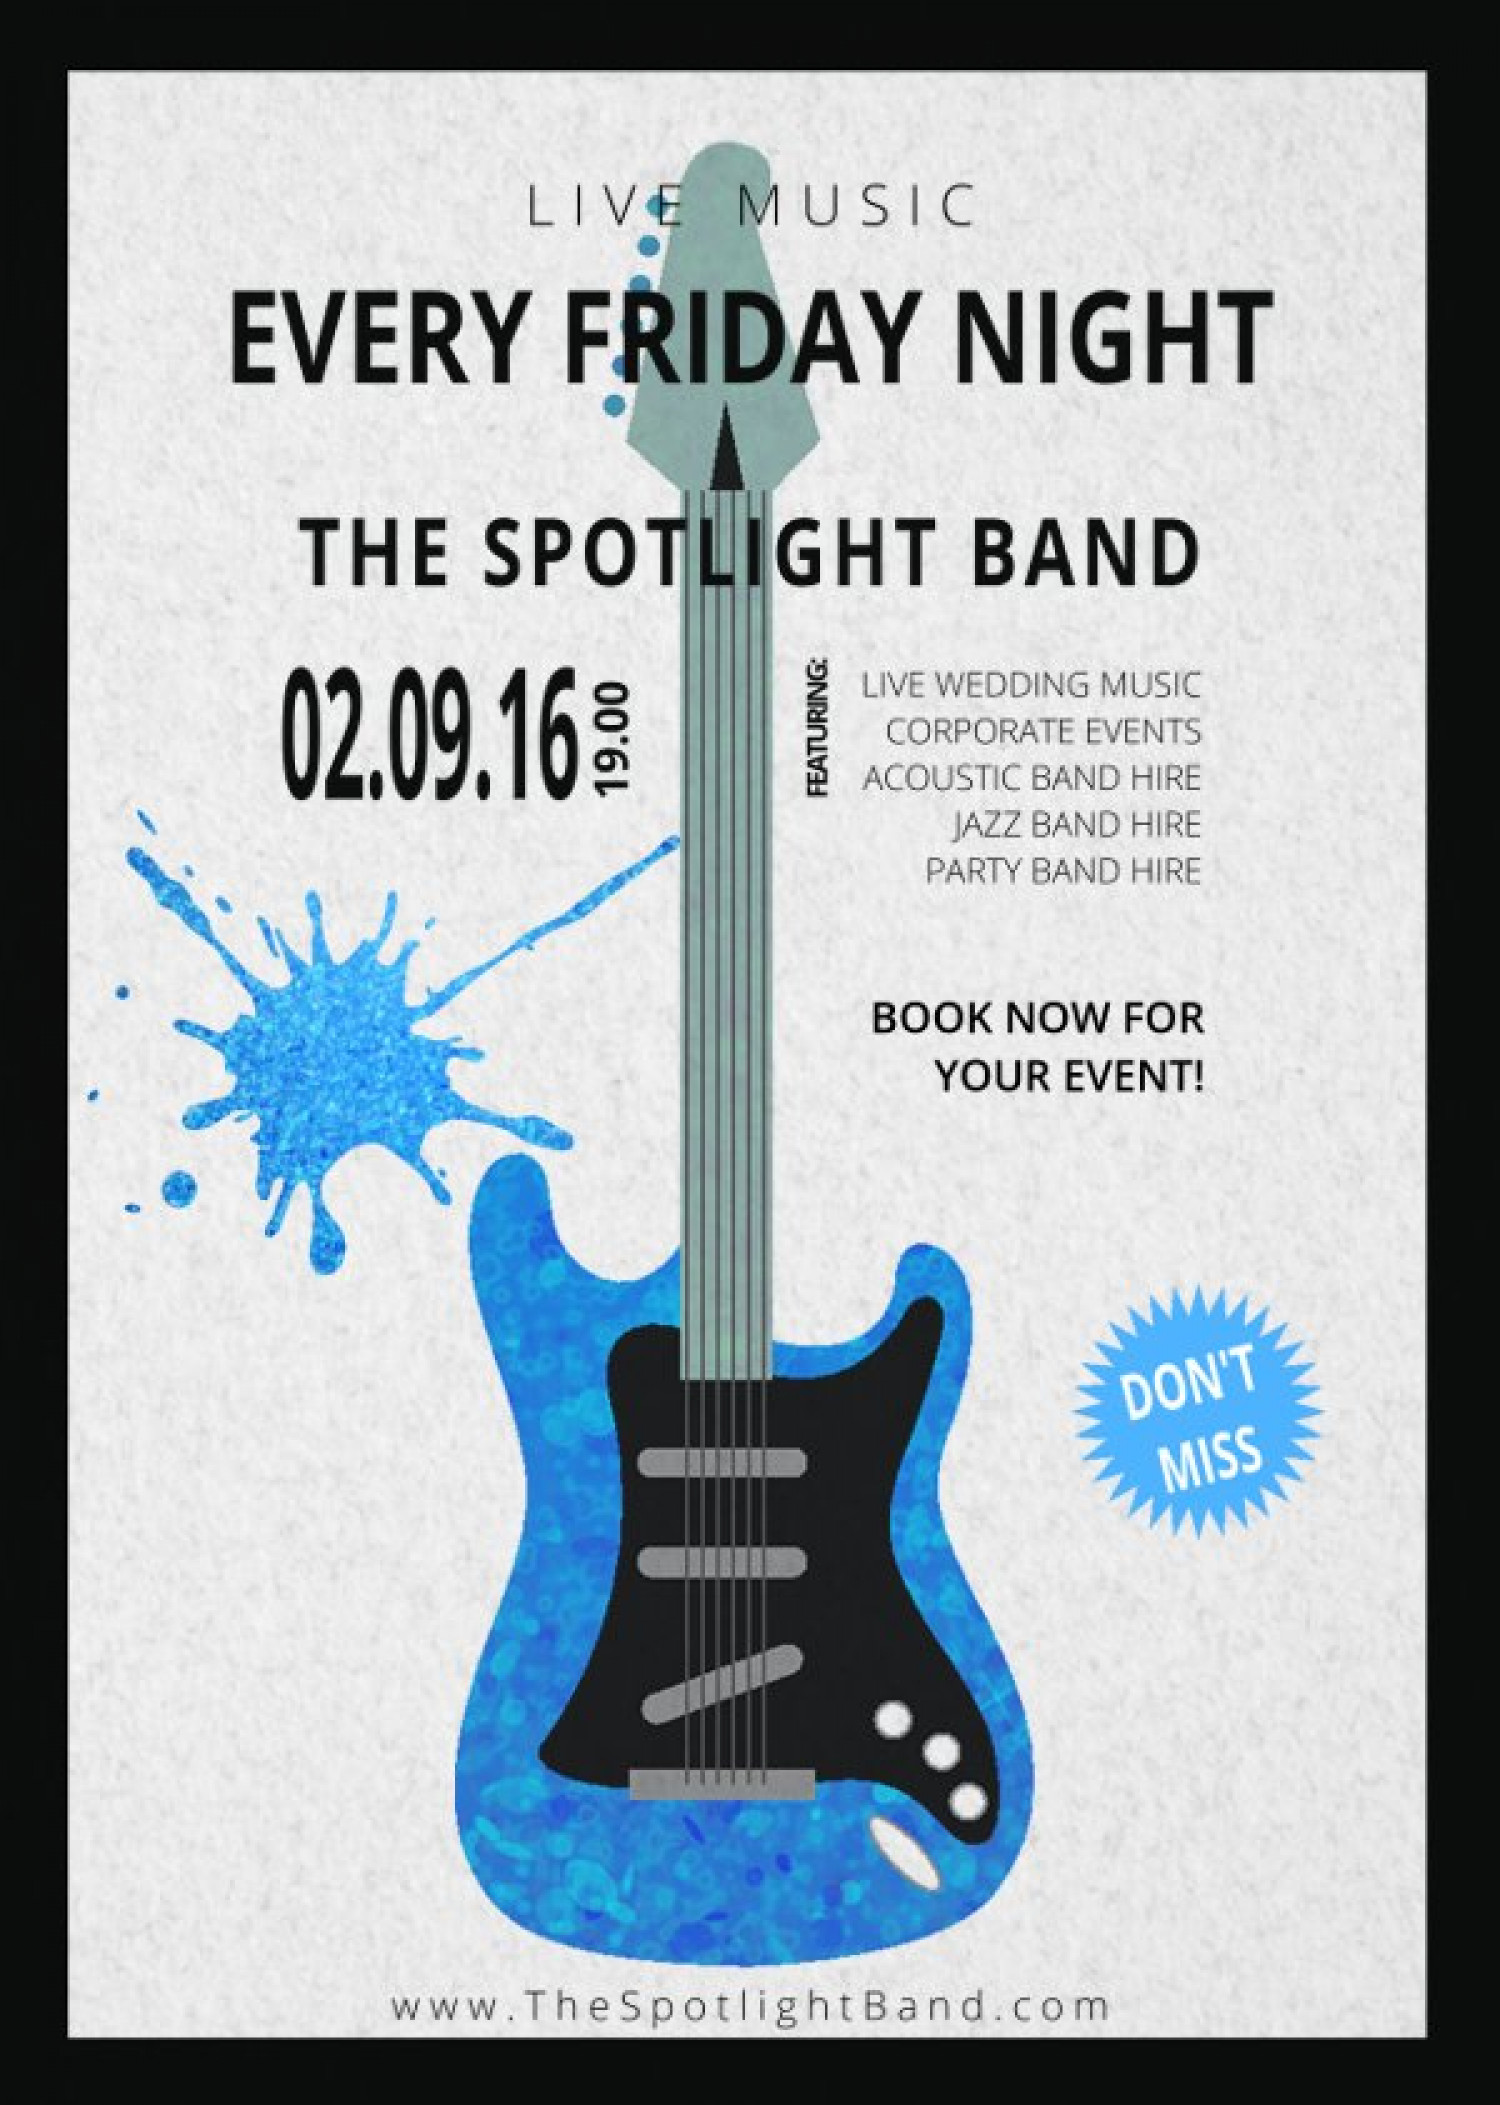 Live Wedding Music from the Spotlight Band Infographic